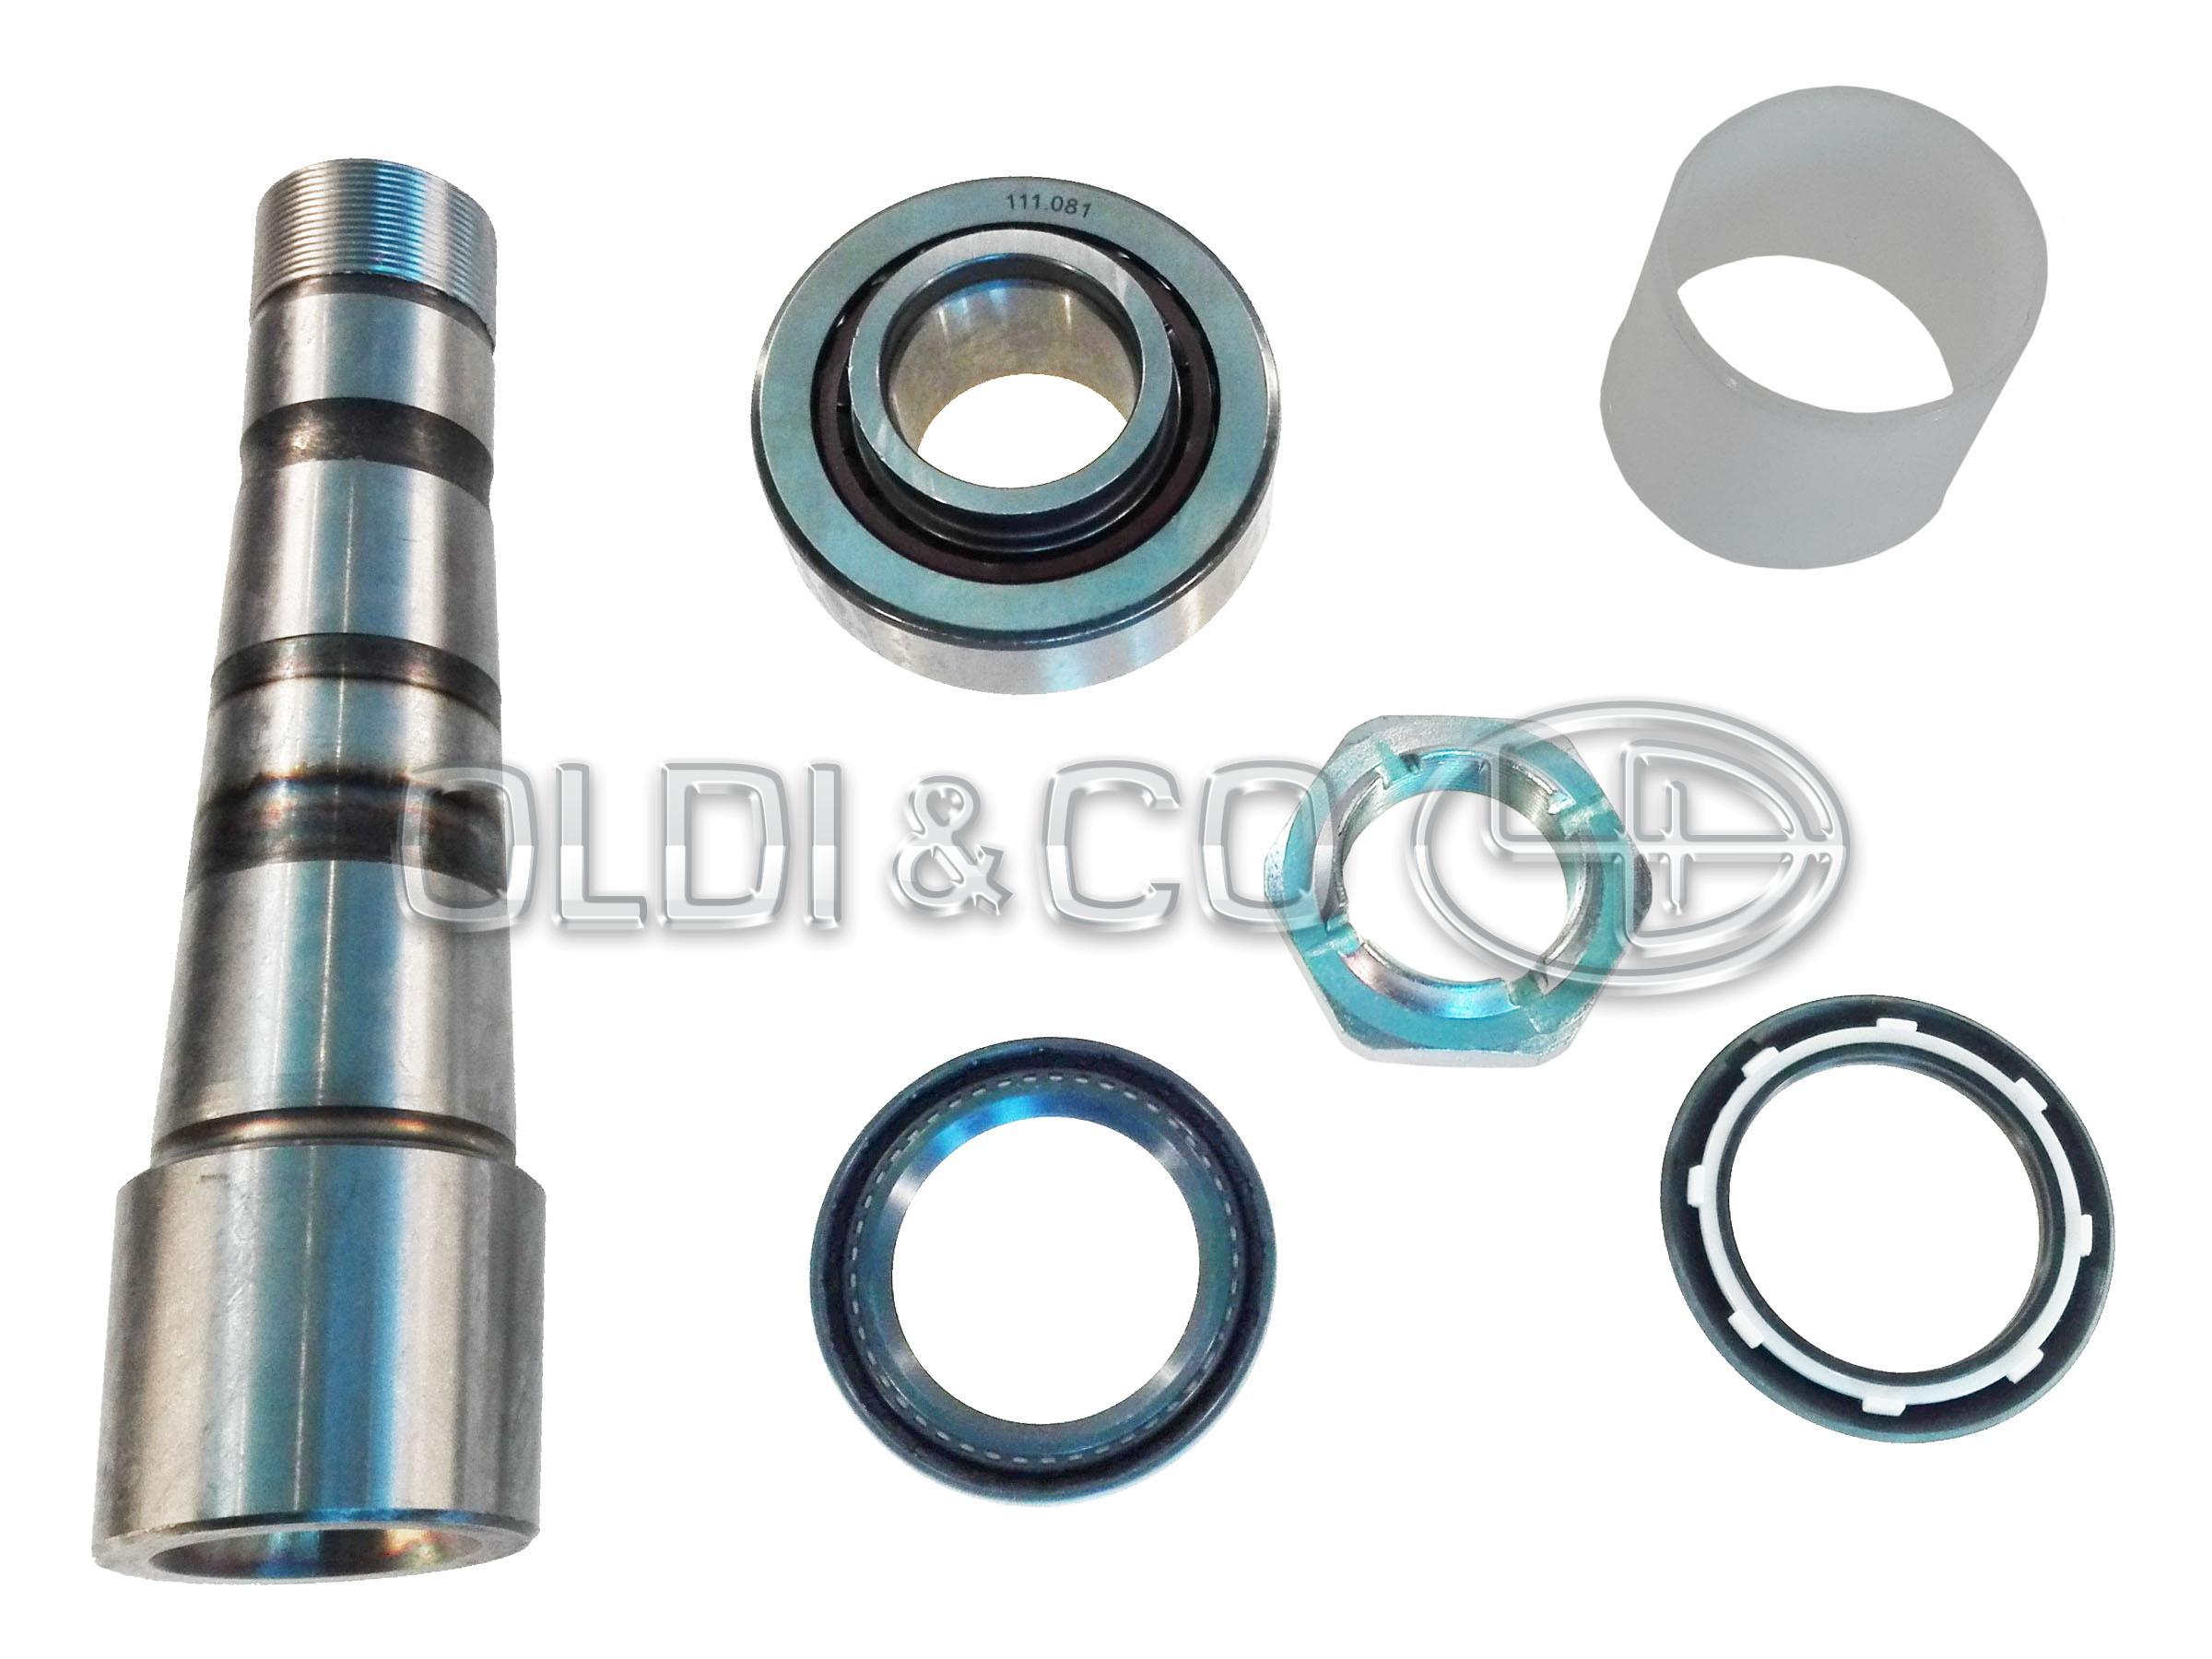 34.074.01817 Suspension parts → King pin - steering knuckle rep. kit